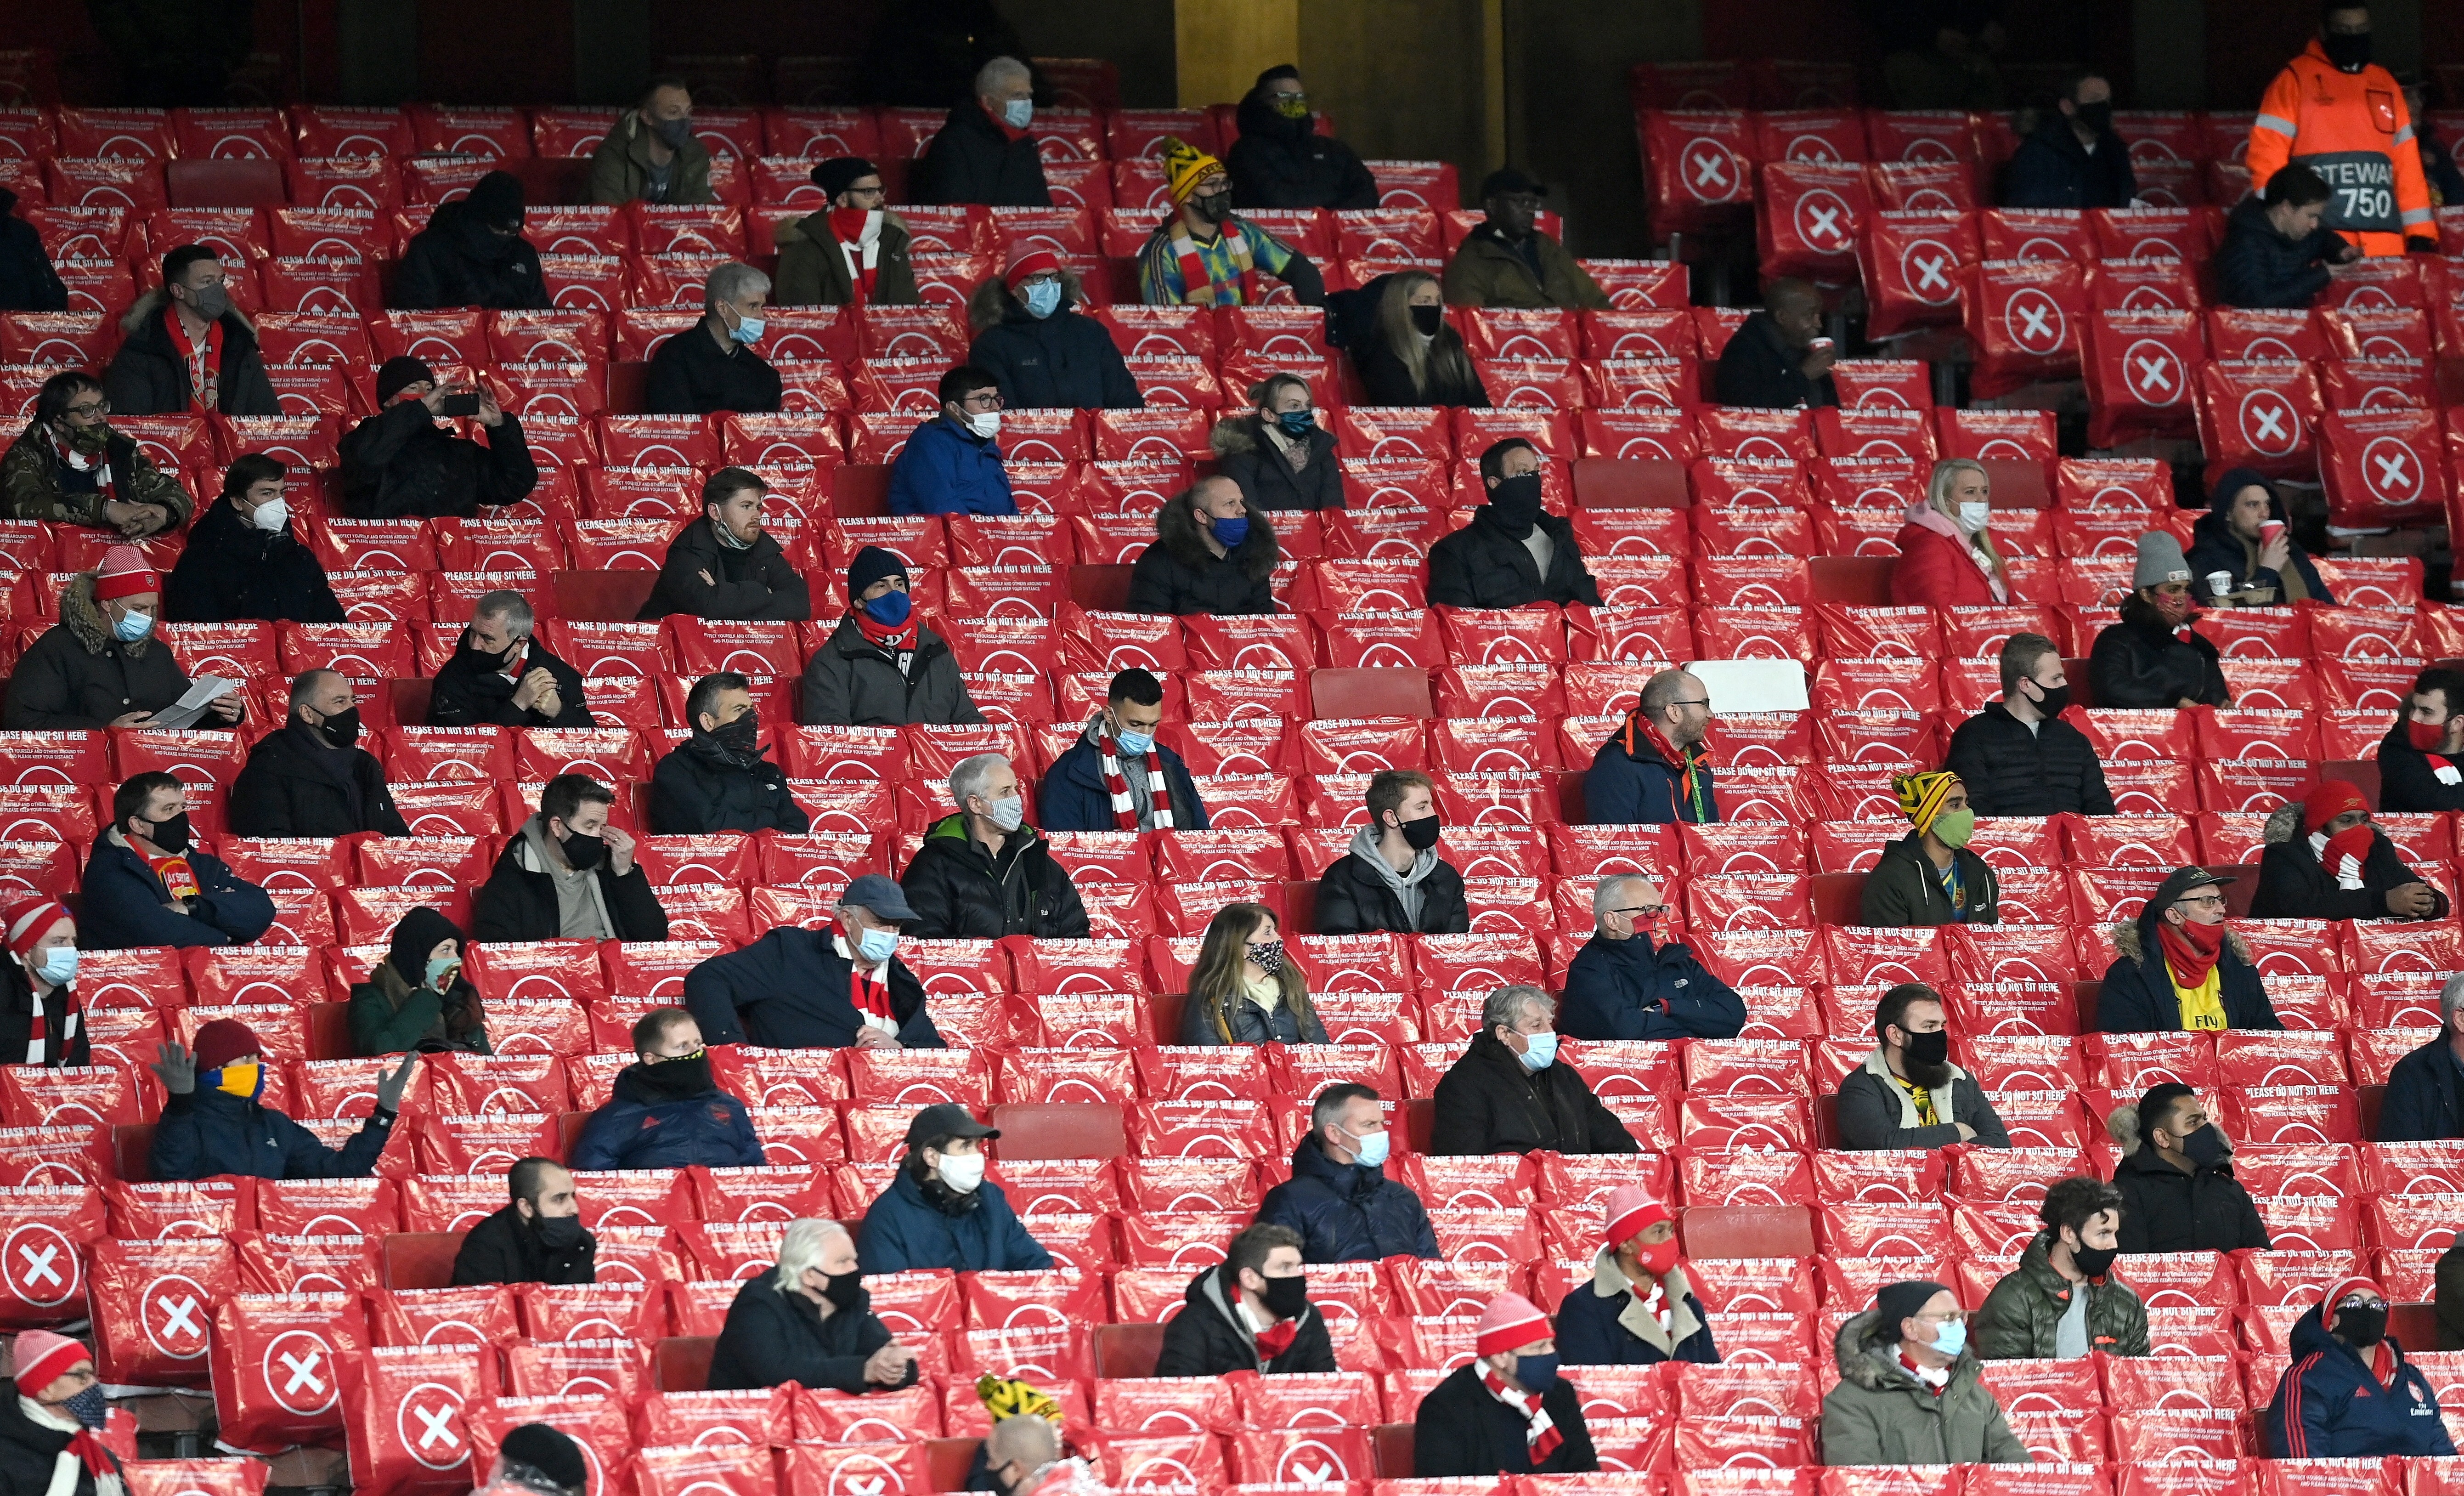 Arsenal fans are socially distanced between blocked seats at the Europa League group B match against Rapid Vienna in London. Photo: EPA